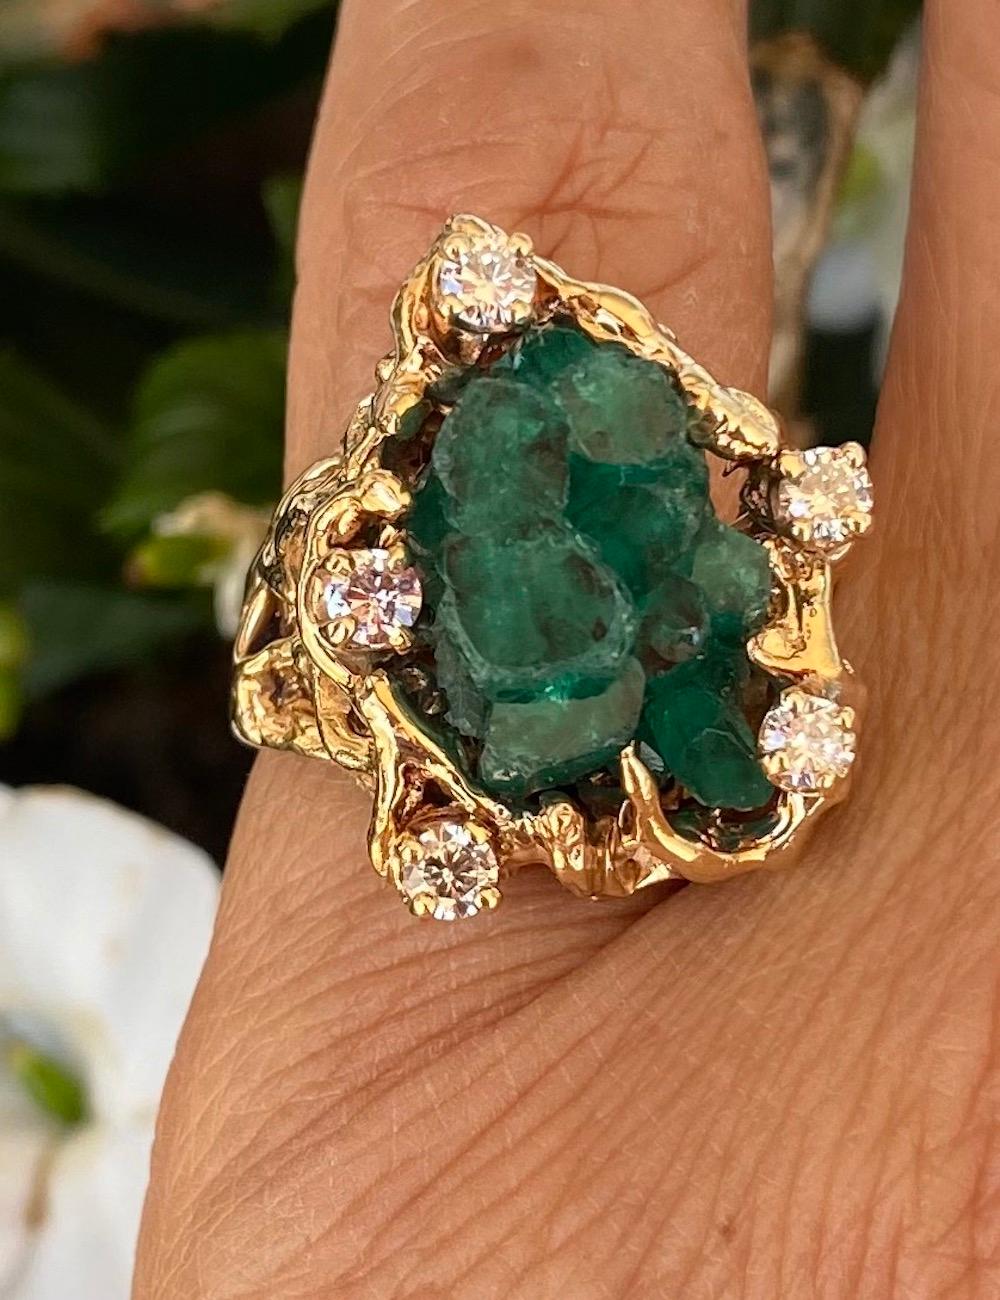 Diamond & Emerald Beryl Crystal Mineral Ring 14 Karat Yellow Gold
Exciting ring features this organic Beryl Emerald with 9 hexagon crystal protruding from its natural early form.
The emerald itself measures 15 x 12 by 12 mm deep.
Estimated weight is